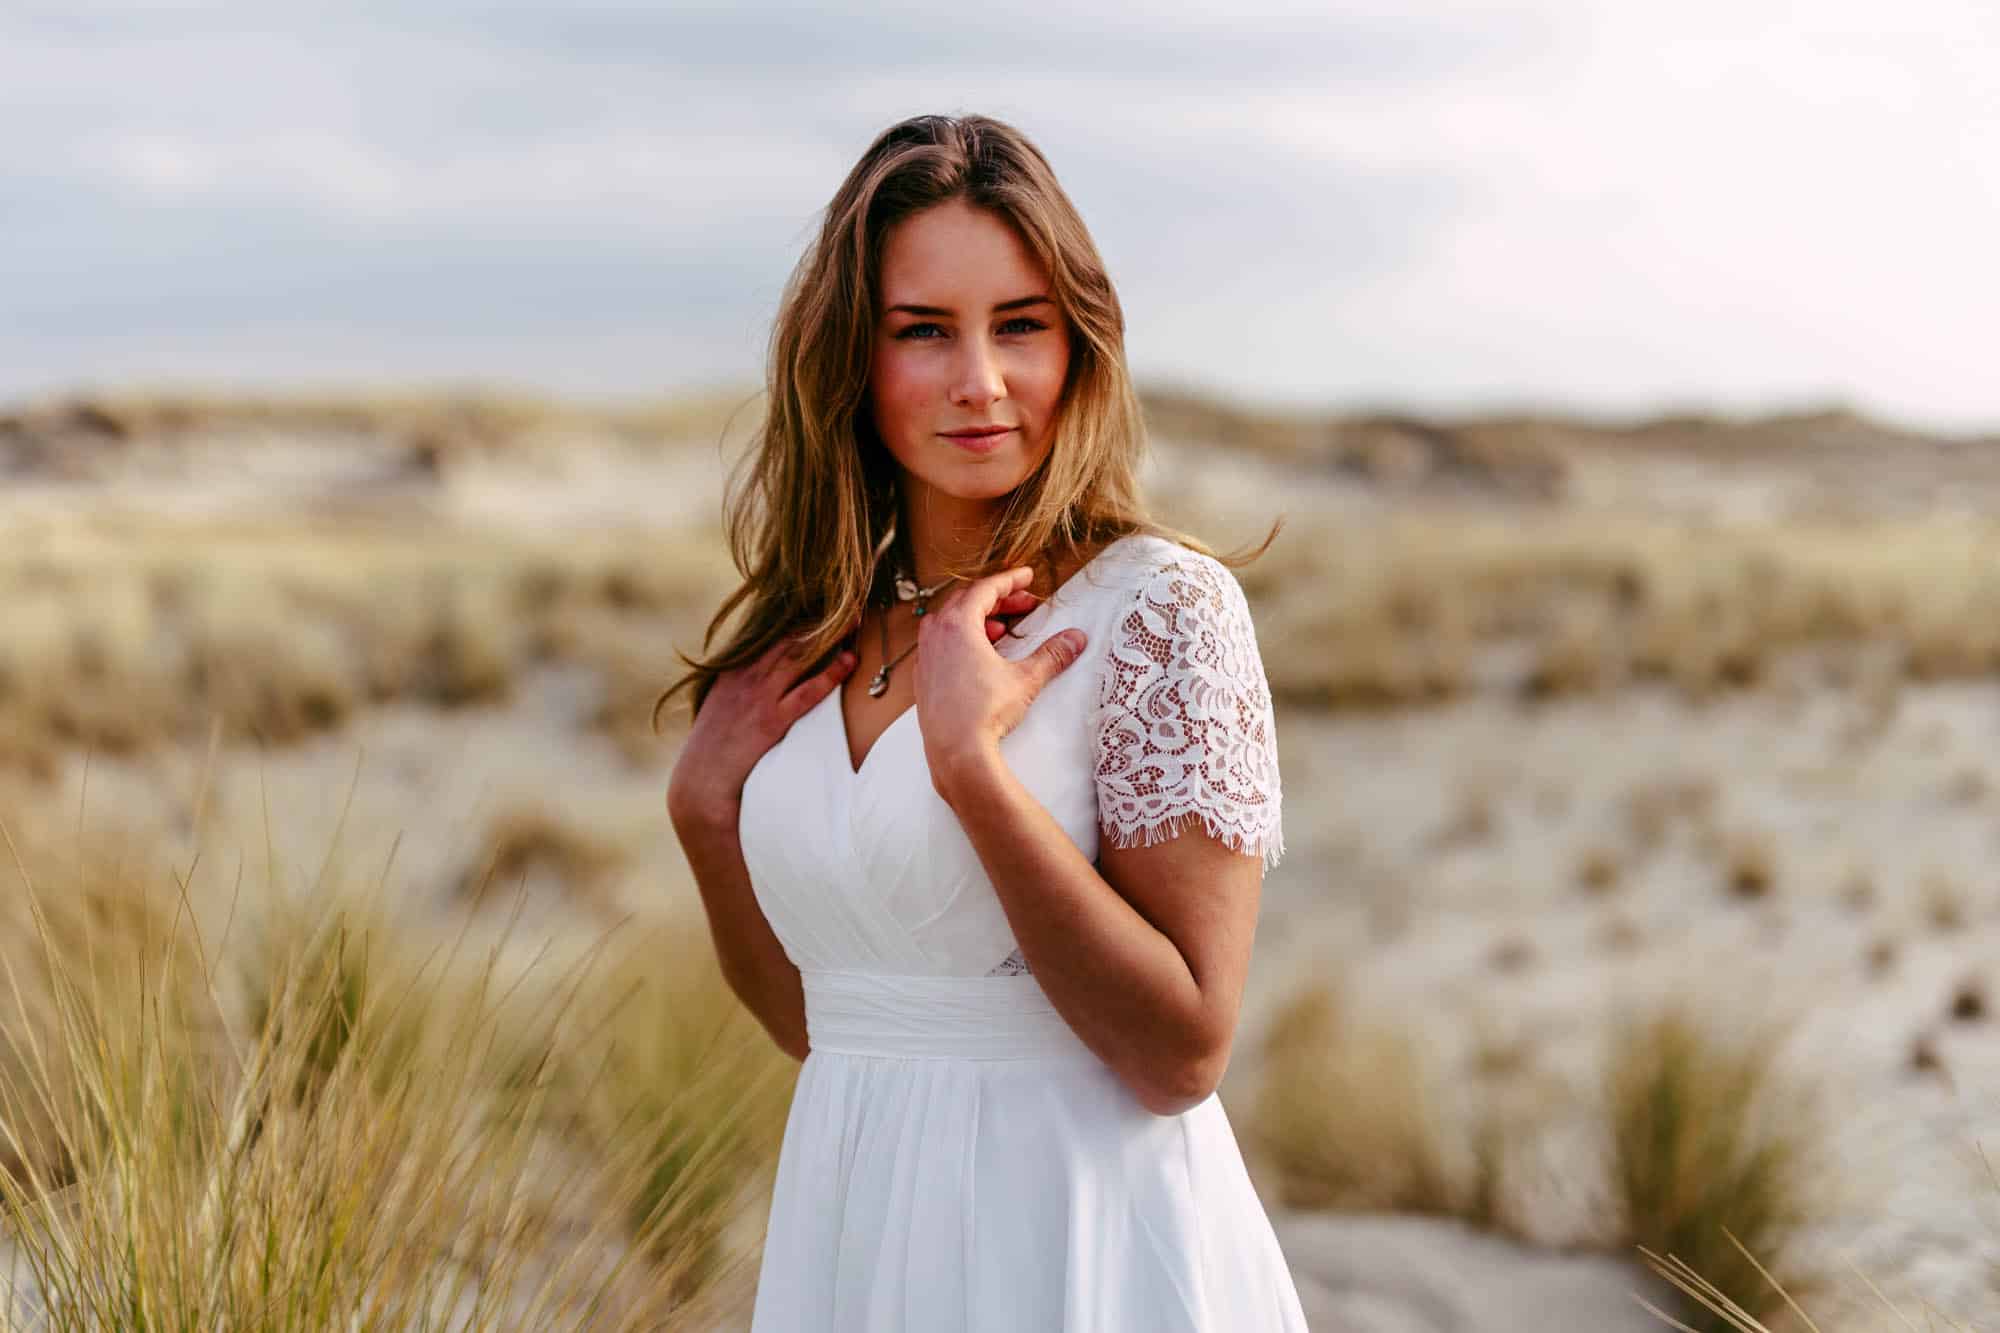 A beautiful woman in a white wedding dress standing in the sand.